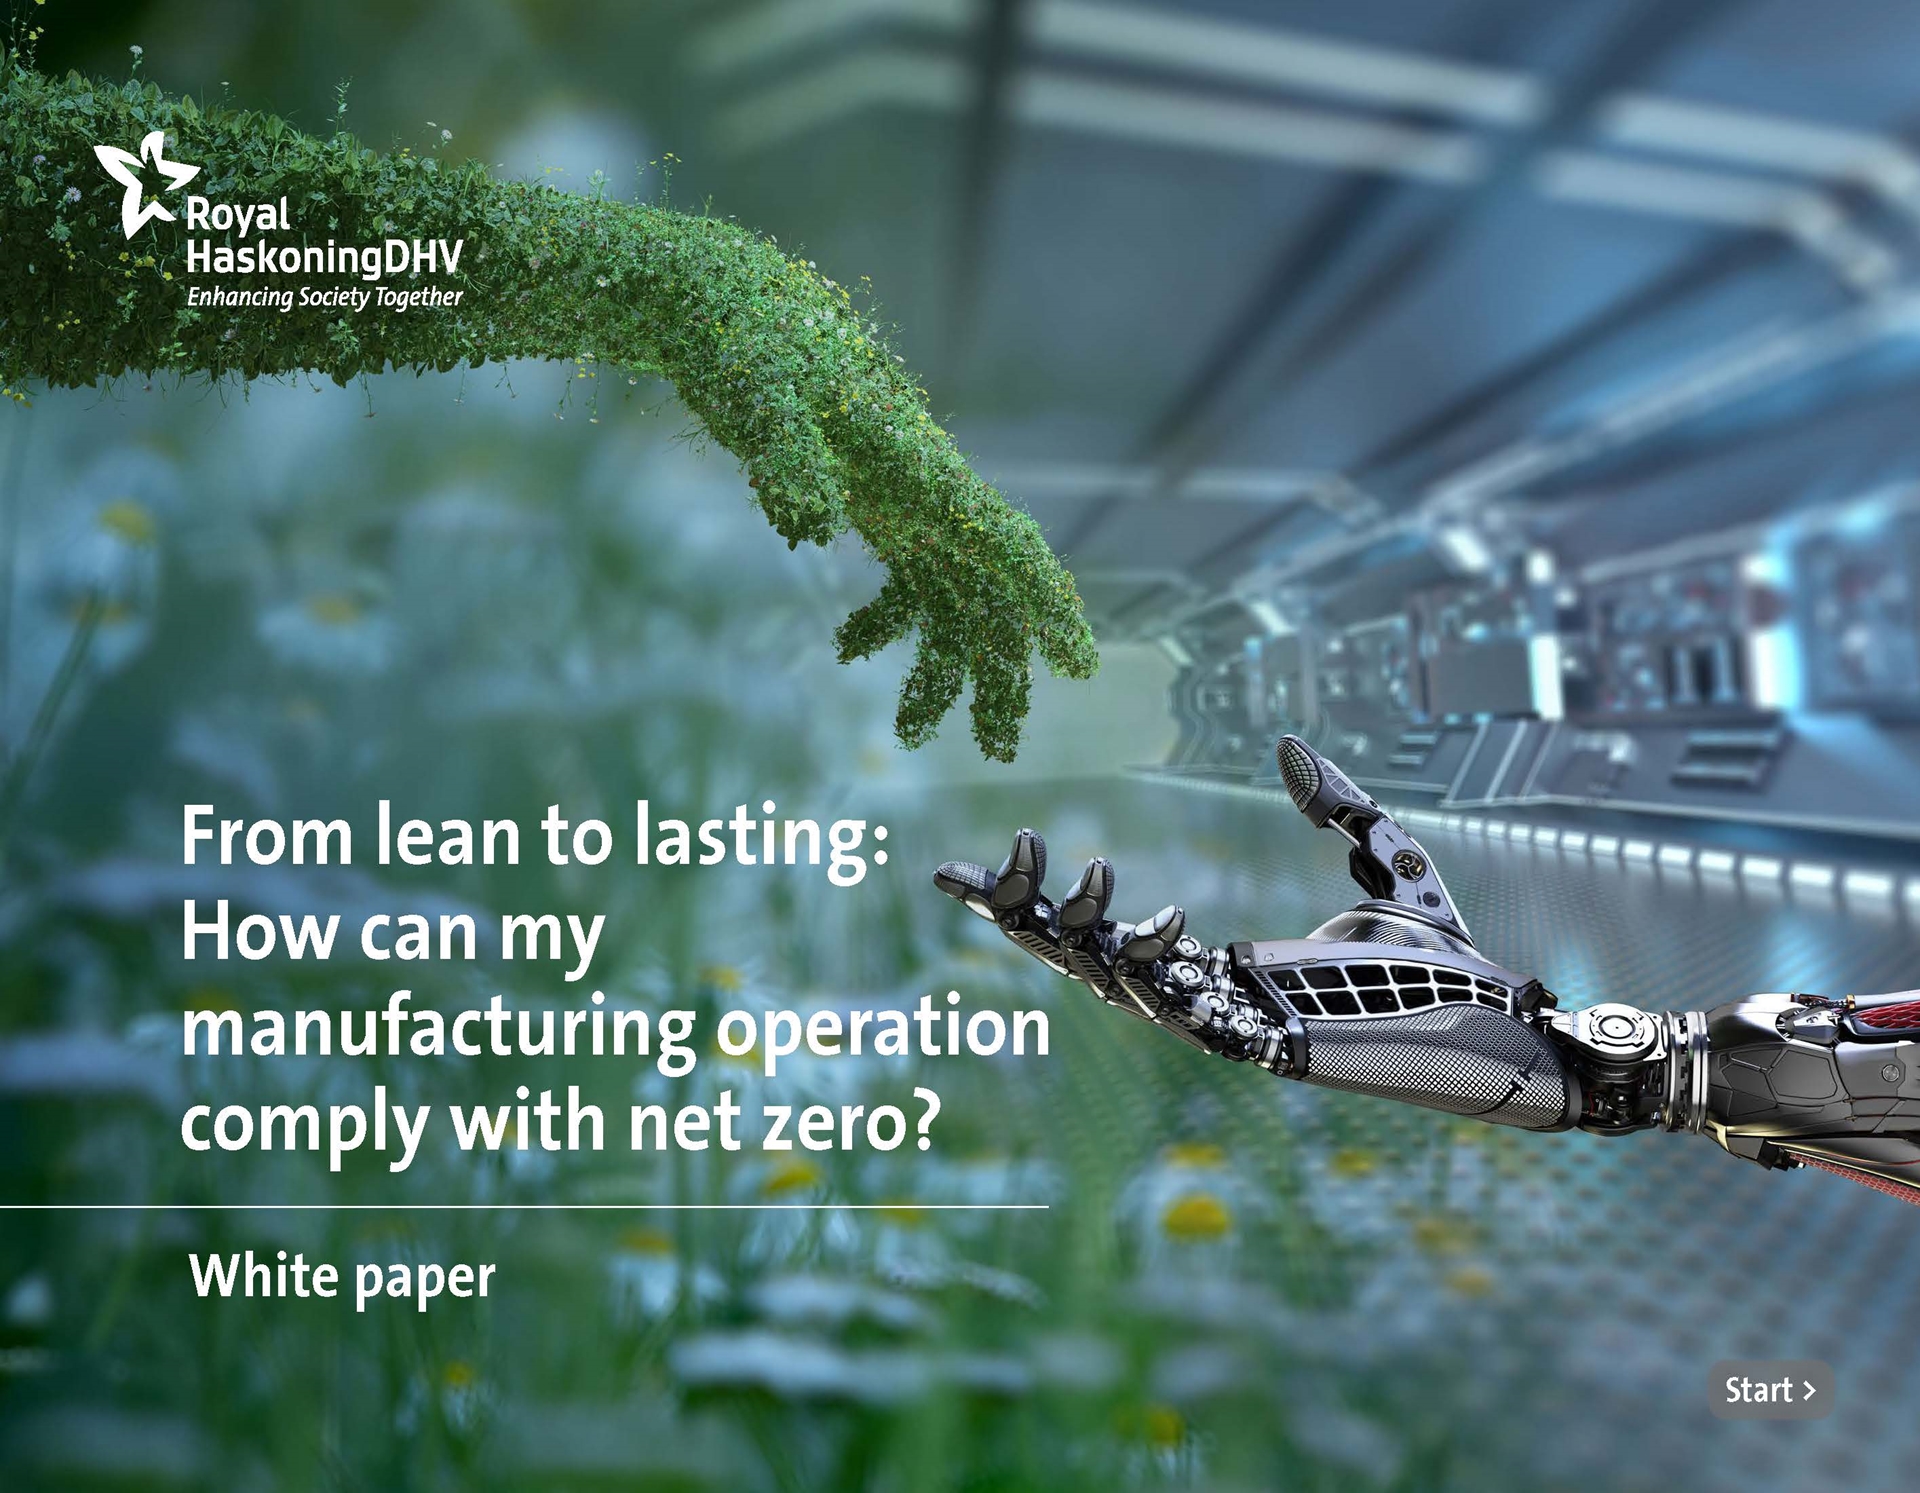 From lean to lasting: How can my manufacturing operation comply with net zero?